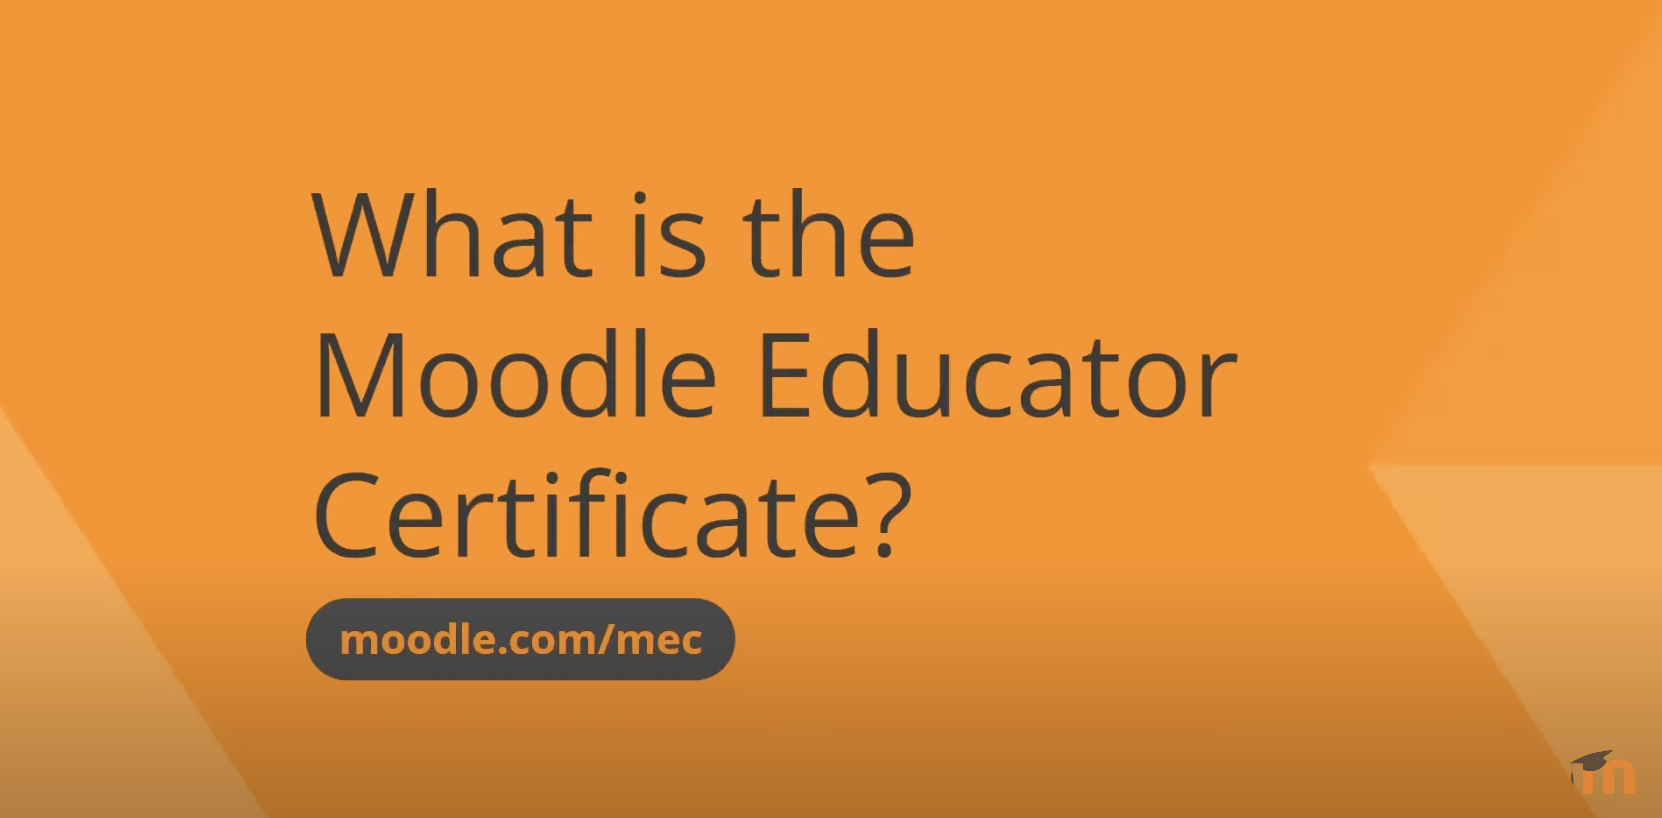 Webinar: Reflections on the Moodle Educator Certification Image